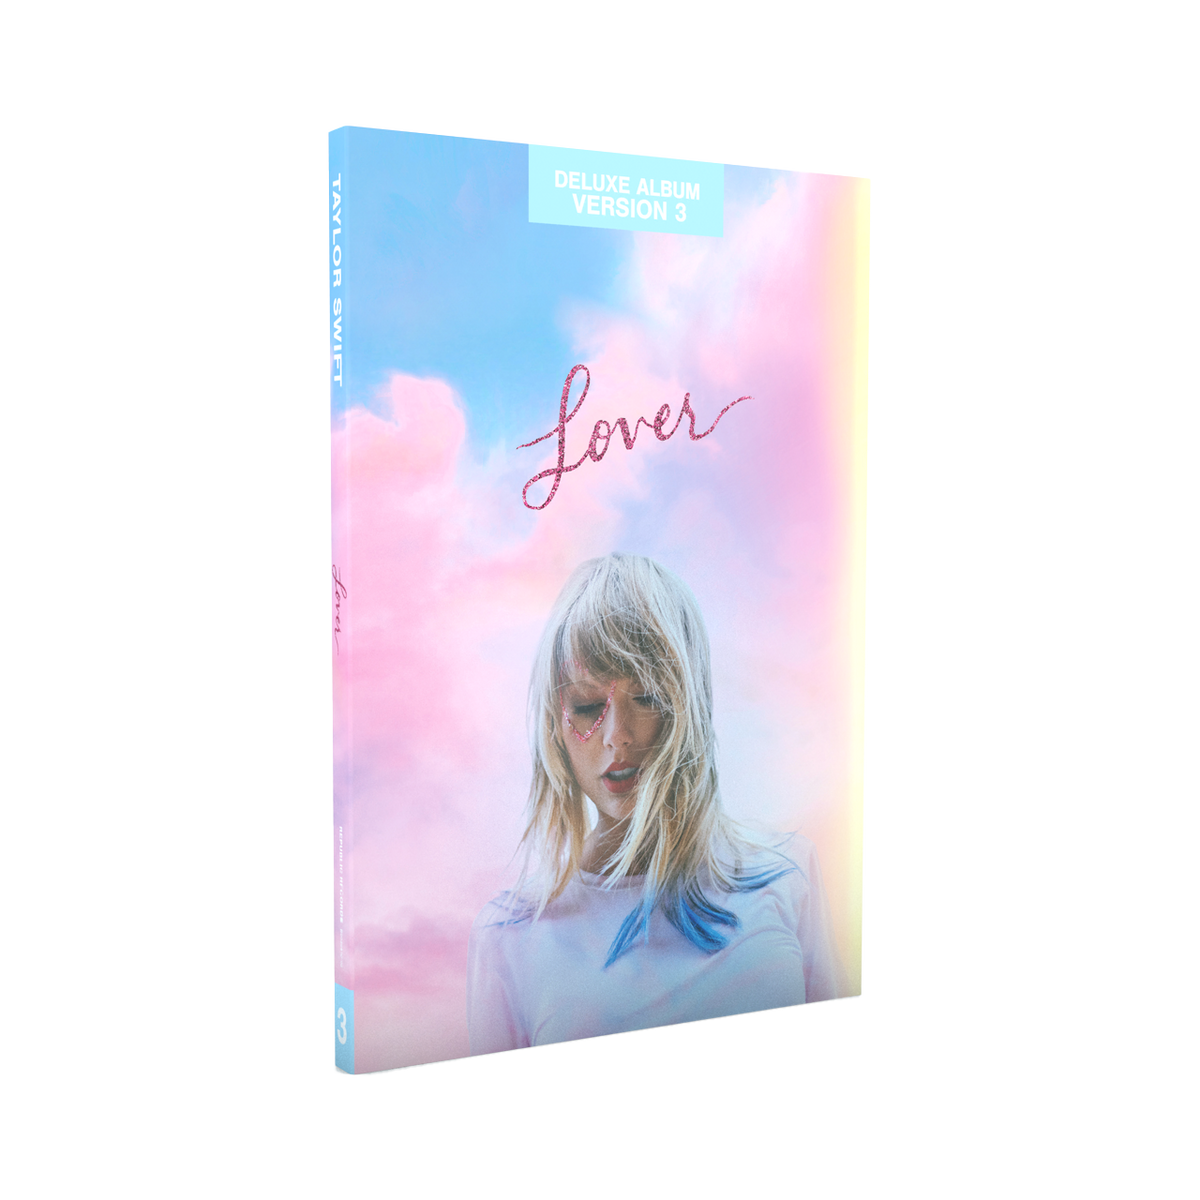 Taylor Swift: Lover CD (Deluxe Version 3)